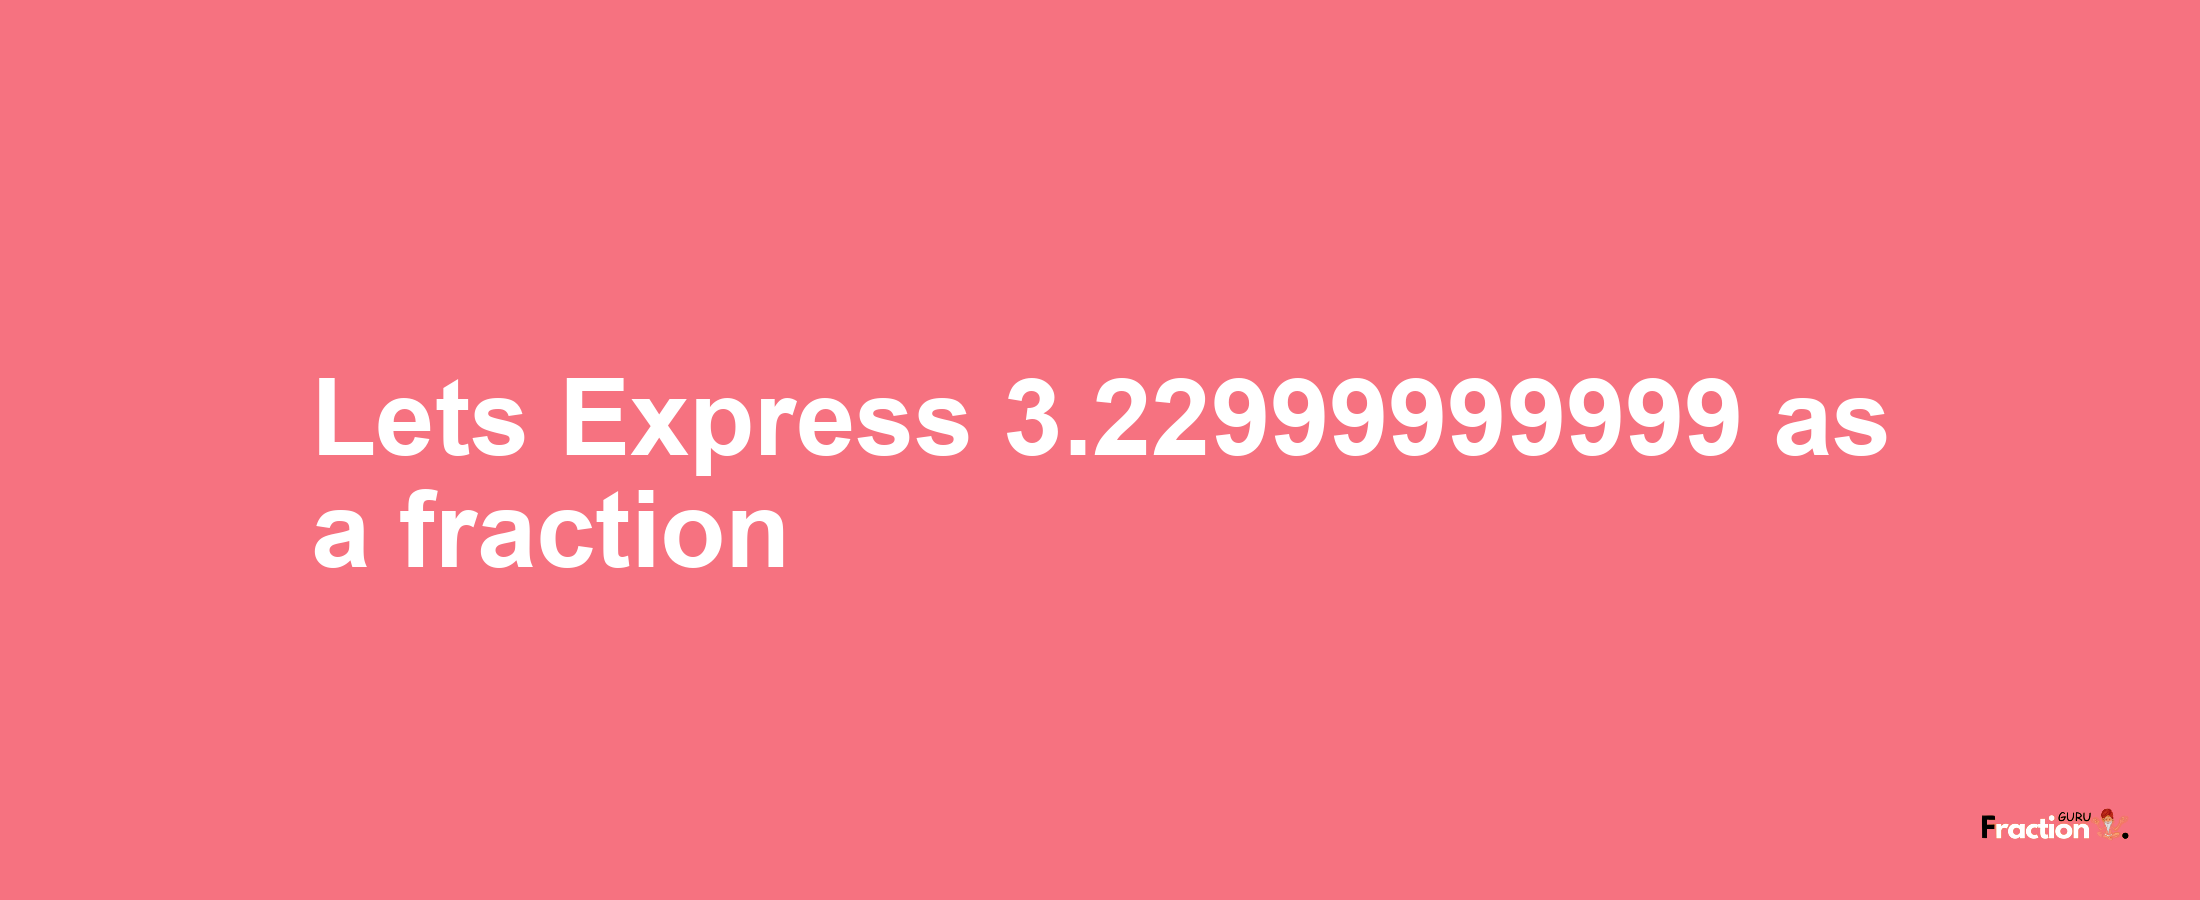 Lets Express 3.22999999999 as afraction